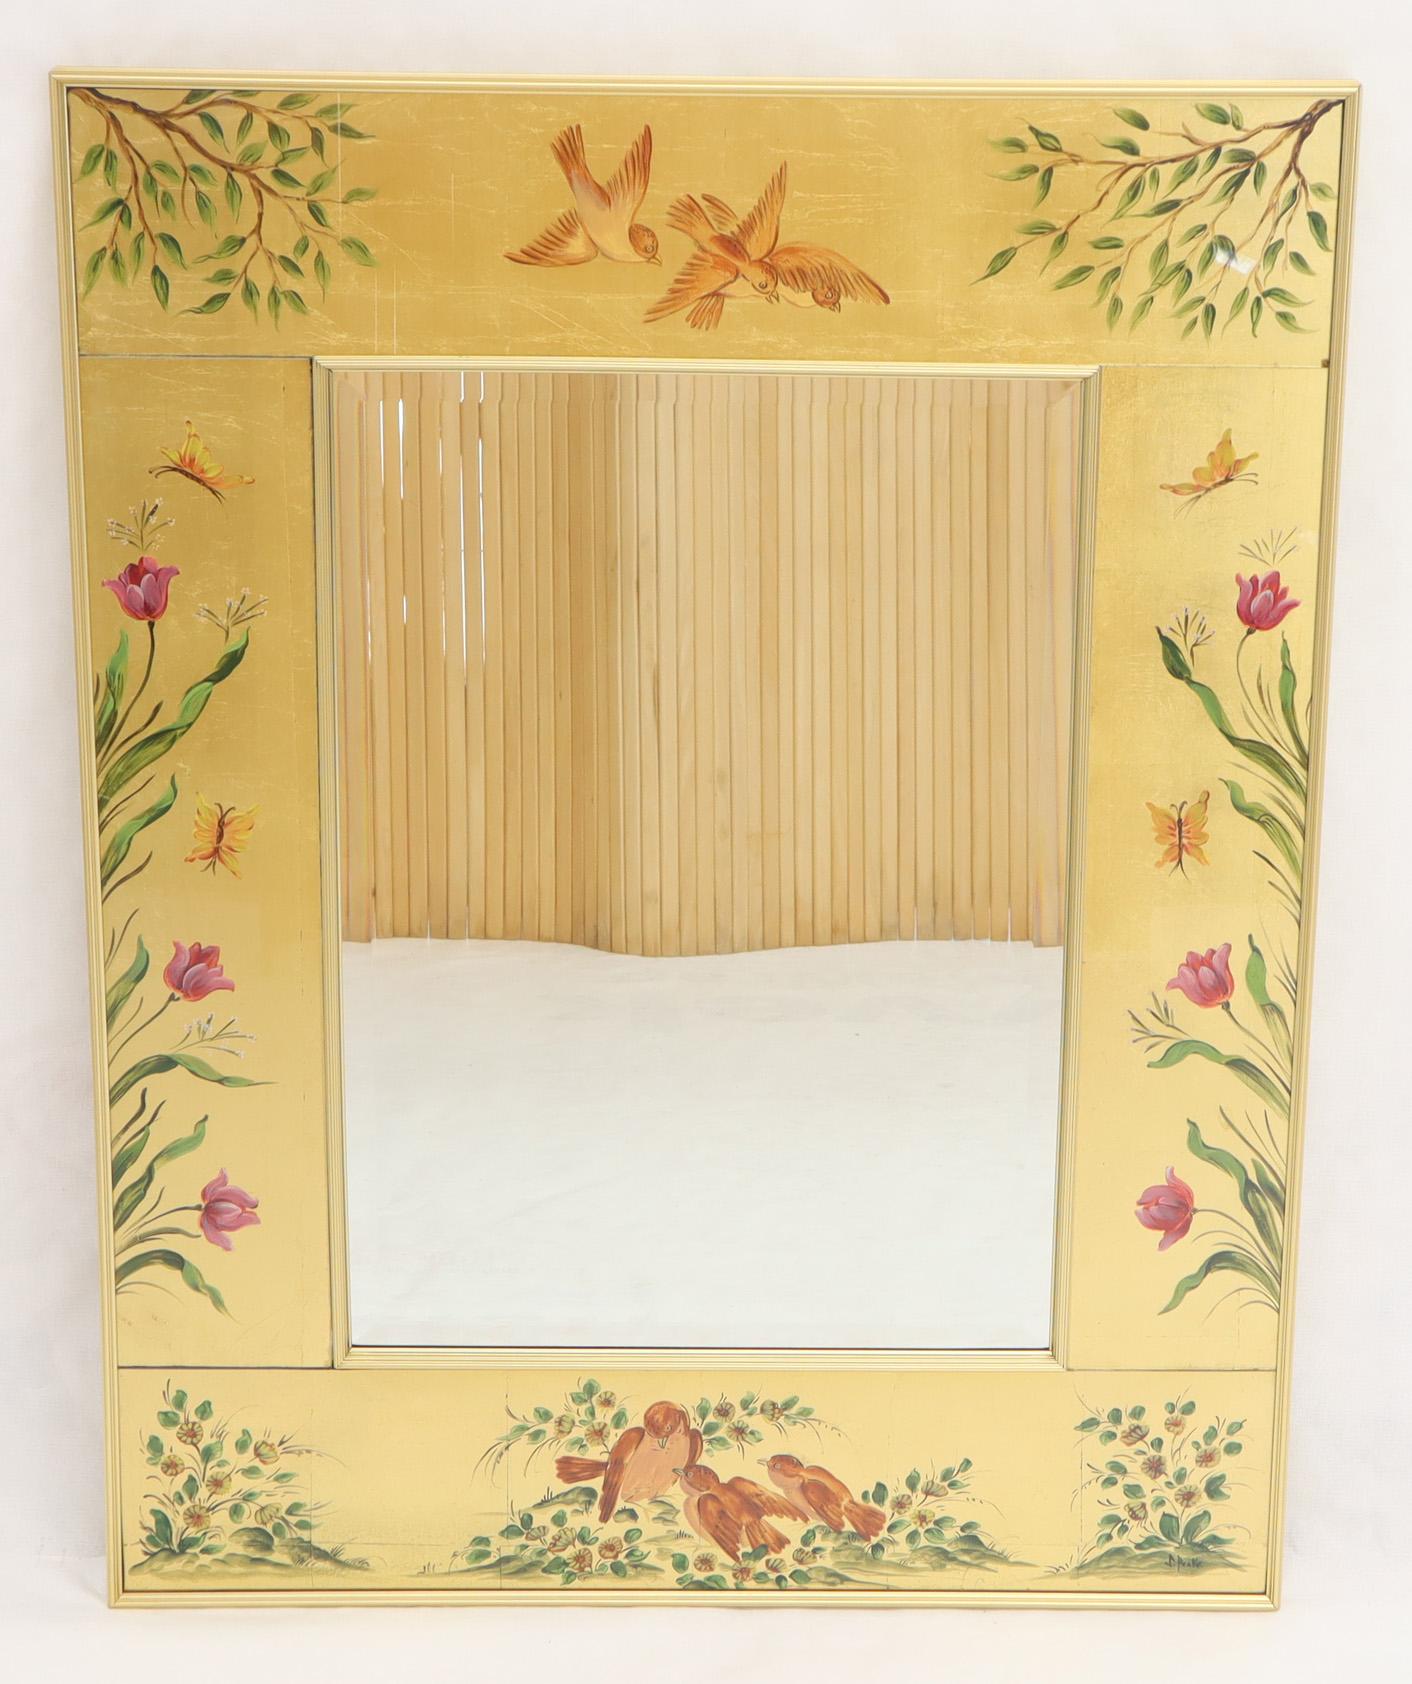 Decorative reverse painted Artist-signed rectangular mirror attributed to La Barge. Beautifully incased in metal molding type frame.